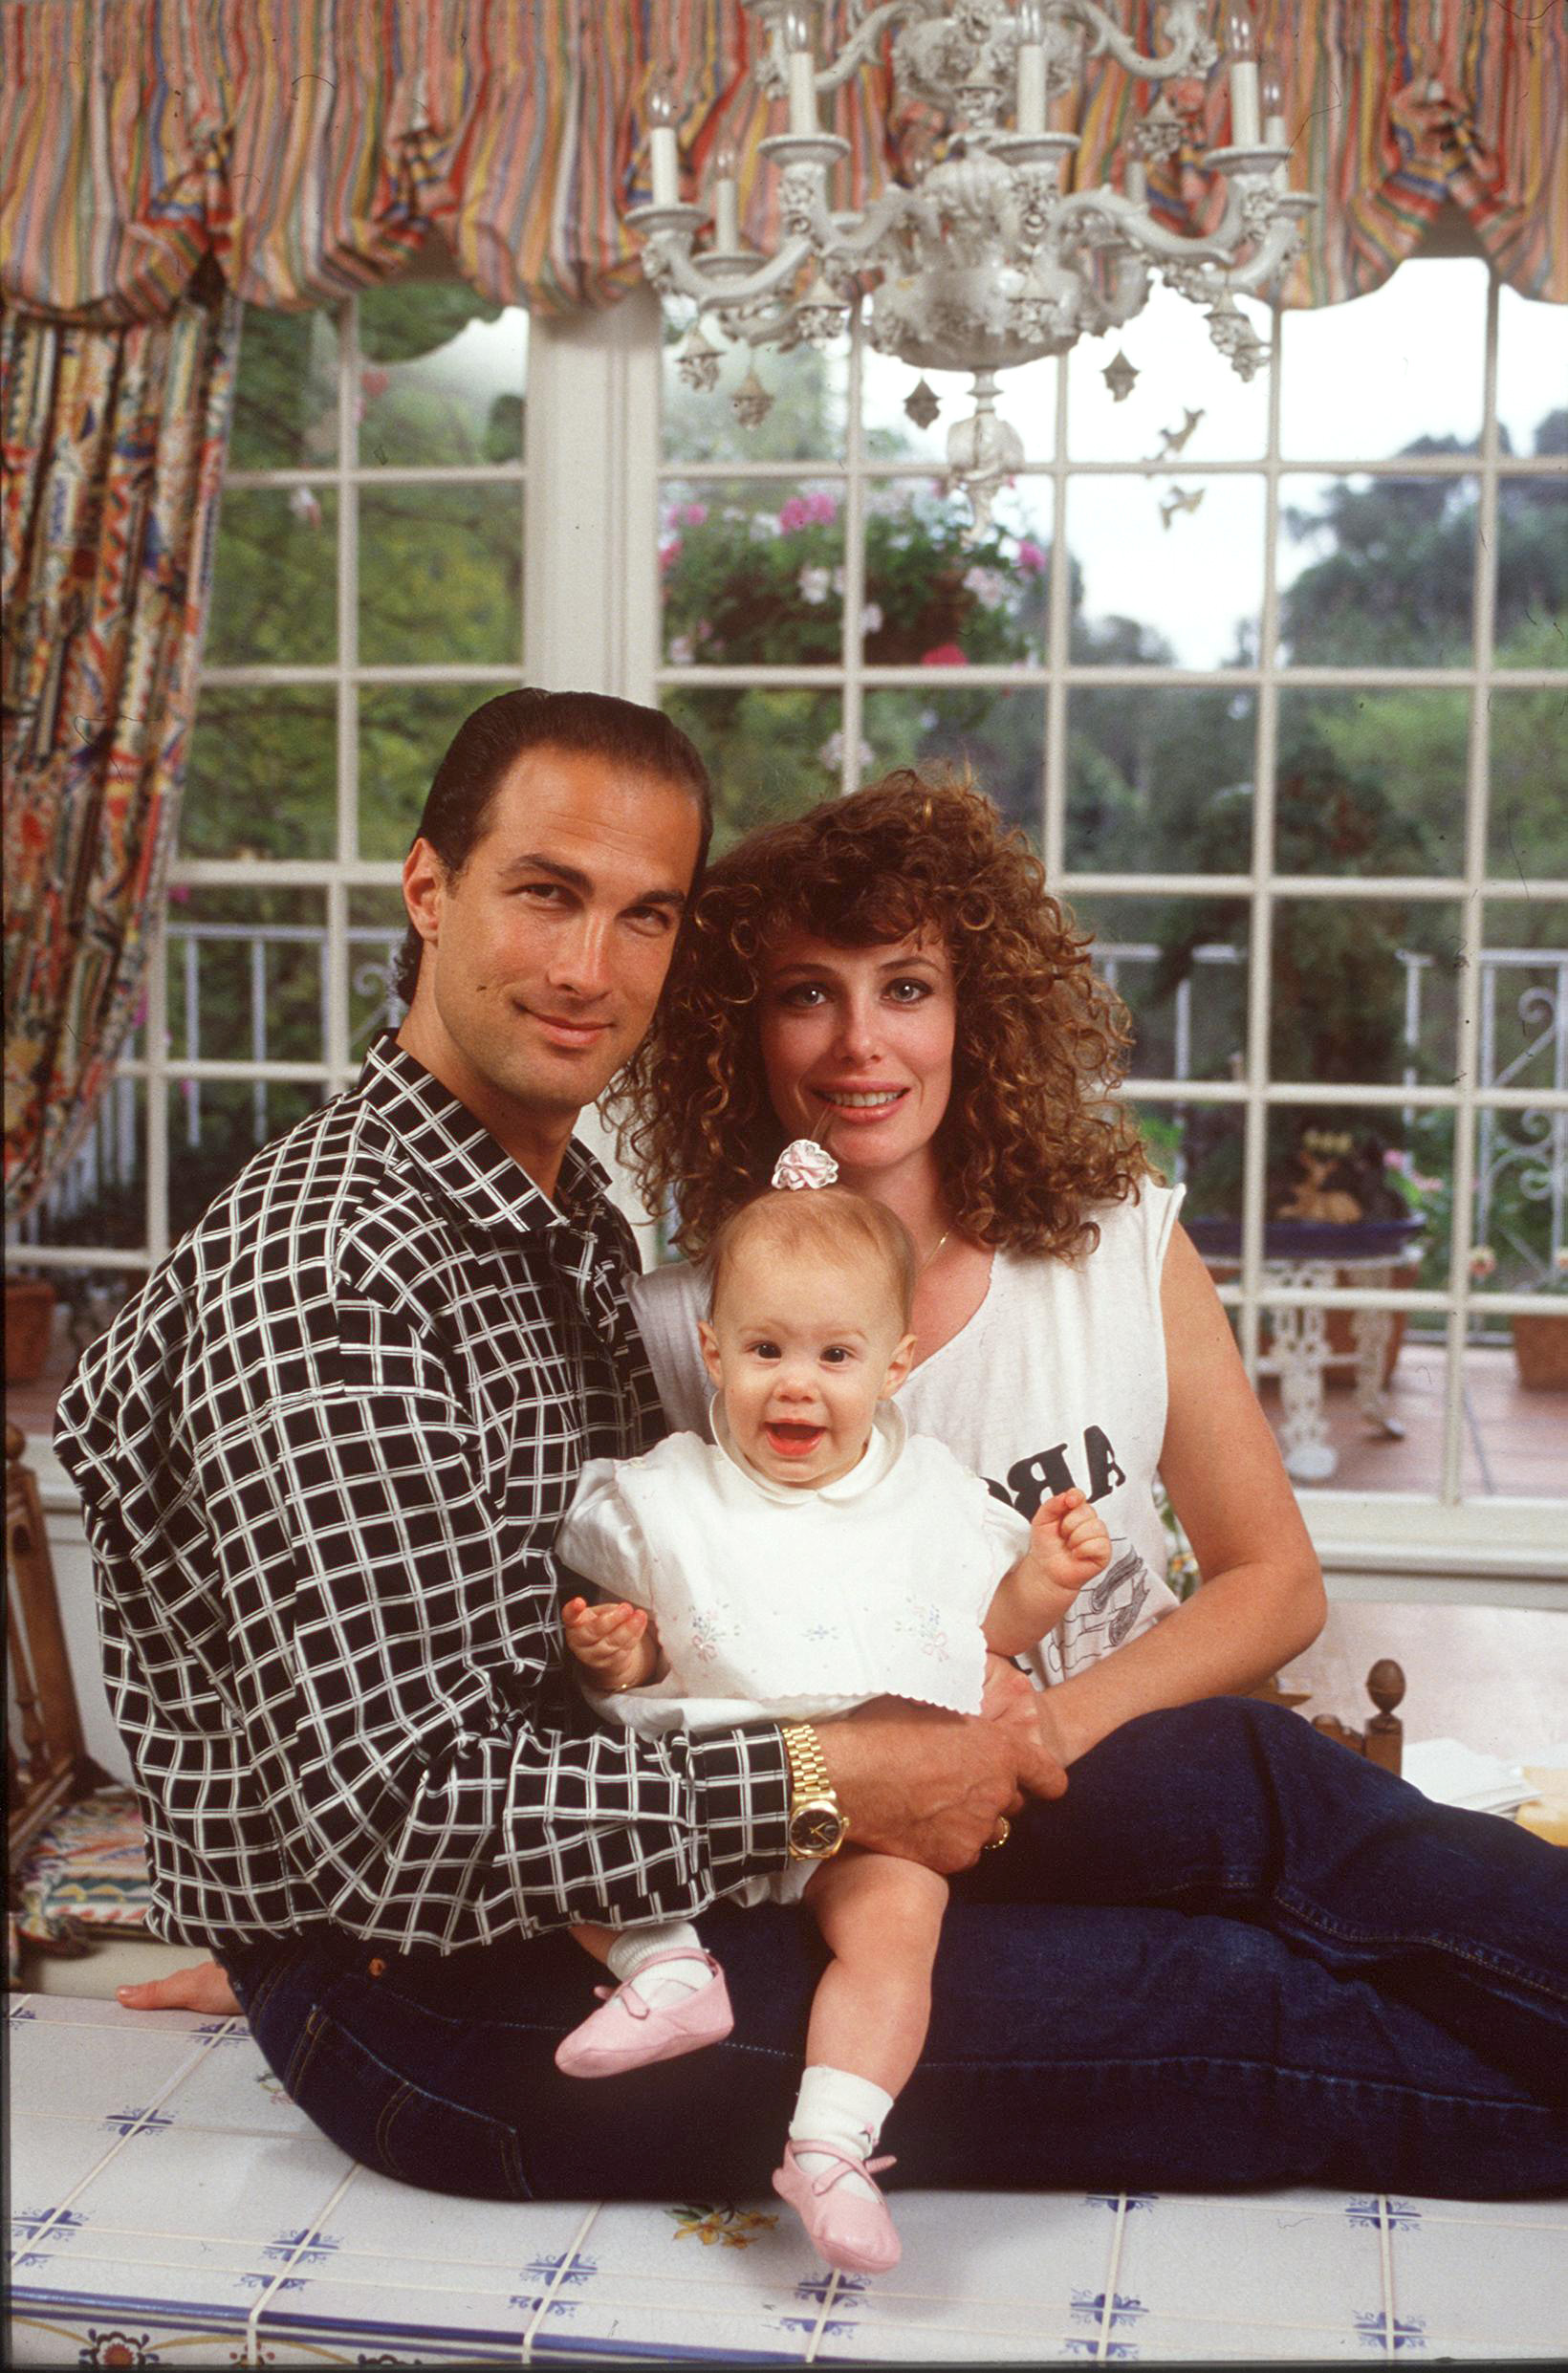 Steven Seagal and Kelly LeBrock with their first child in Bevely Hills, California, on April 13, 1989 | Source: Getty Images